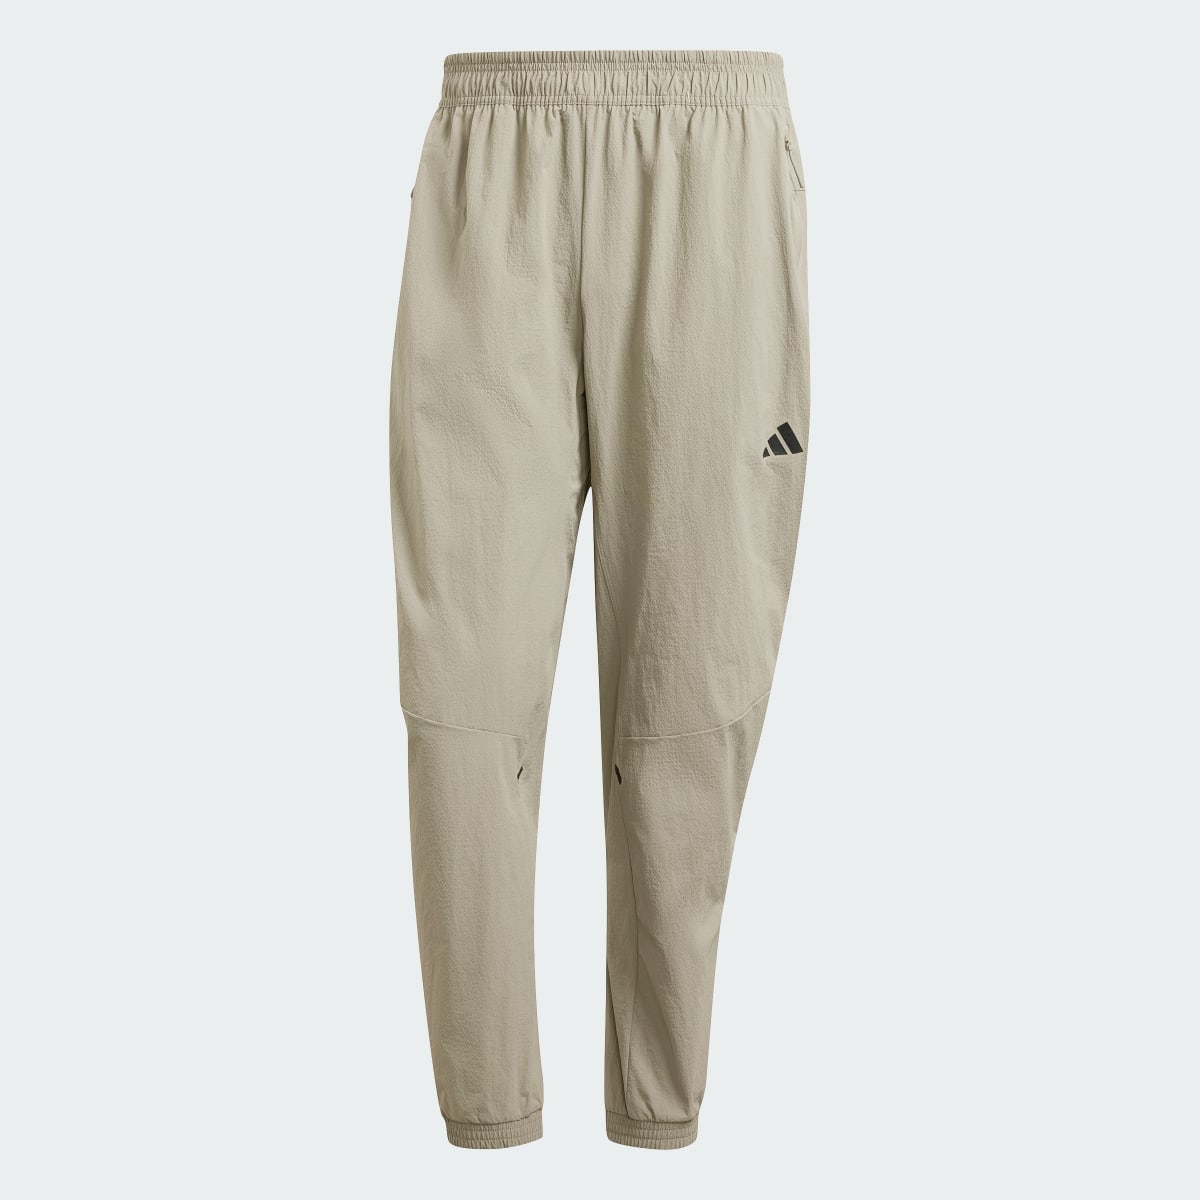 Adidas Designed for Training Workout Joggers. 5